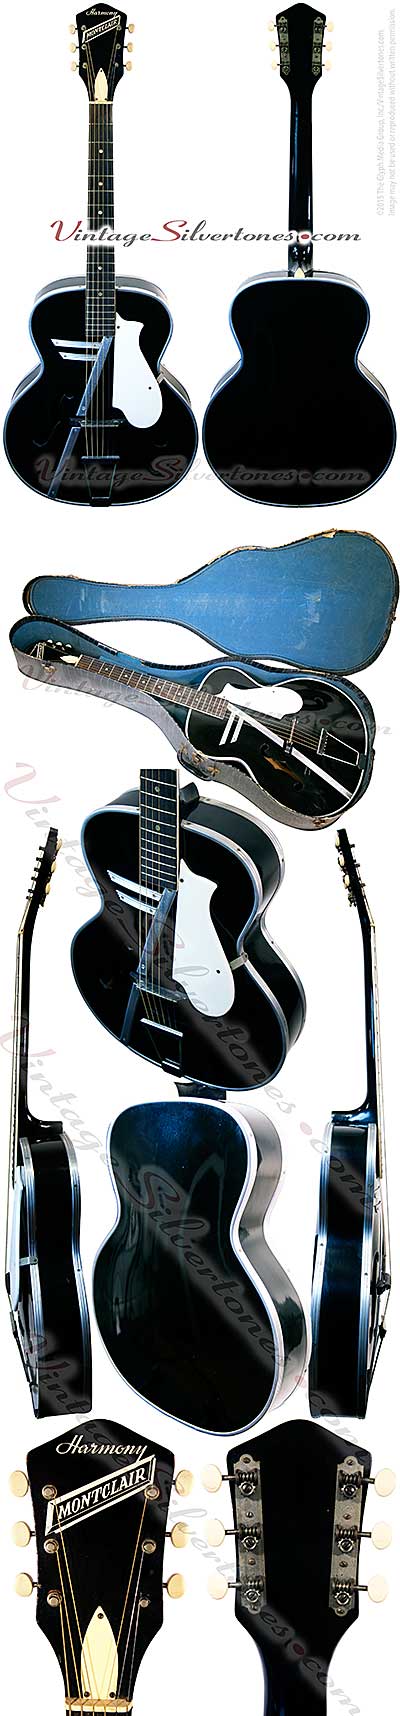 Harmony H956S Montclair made by Harmony in Chicago, acoustic guitar, archtop, black finish, harmometal binding, birch top,made in 1957